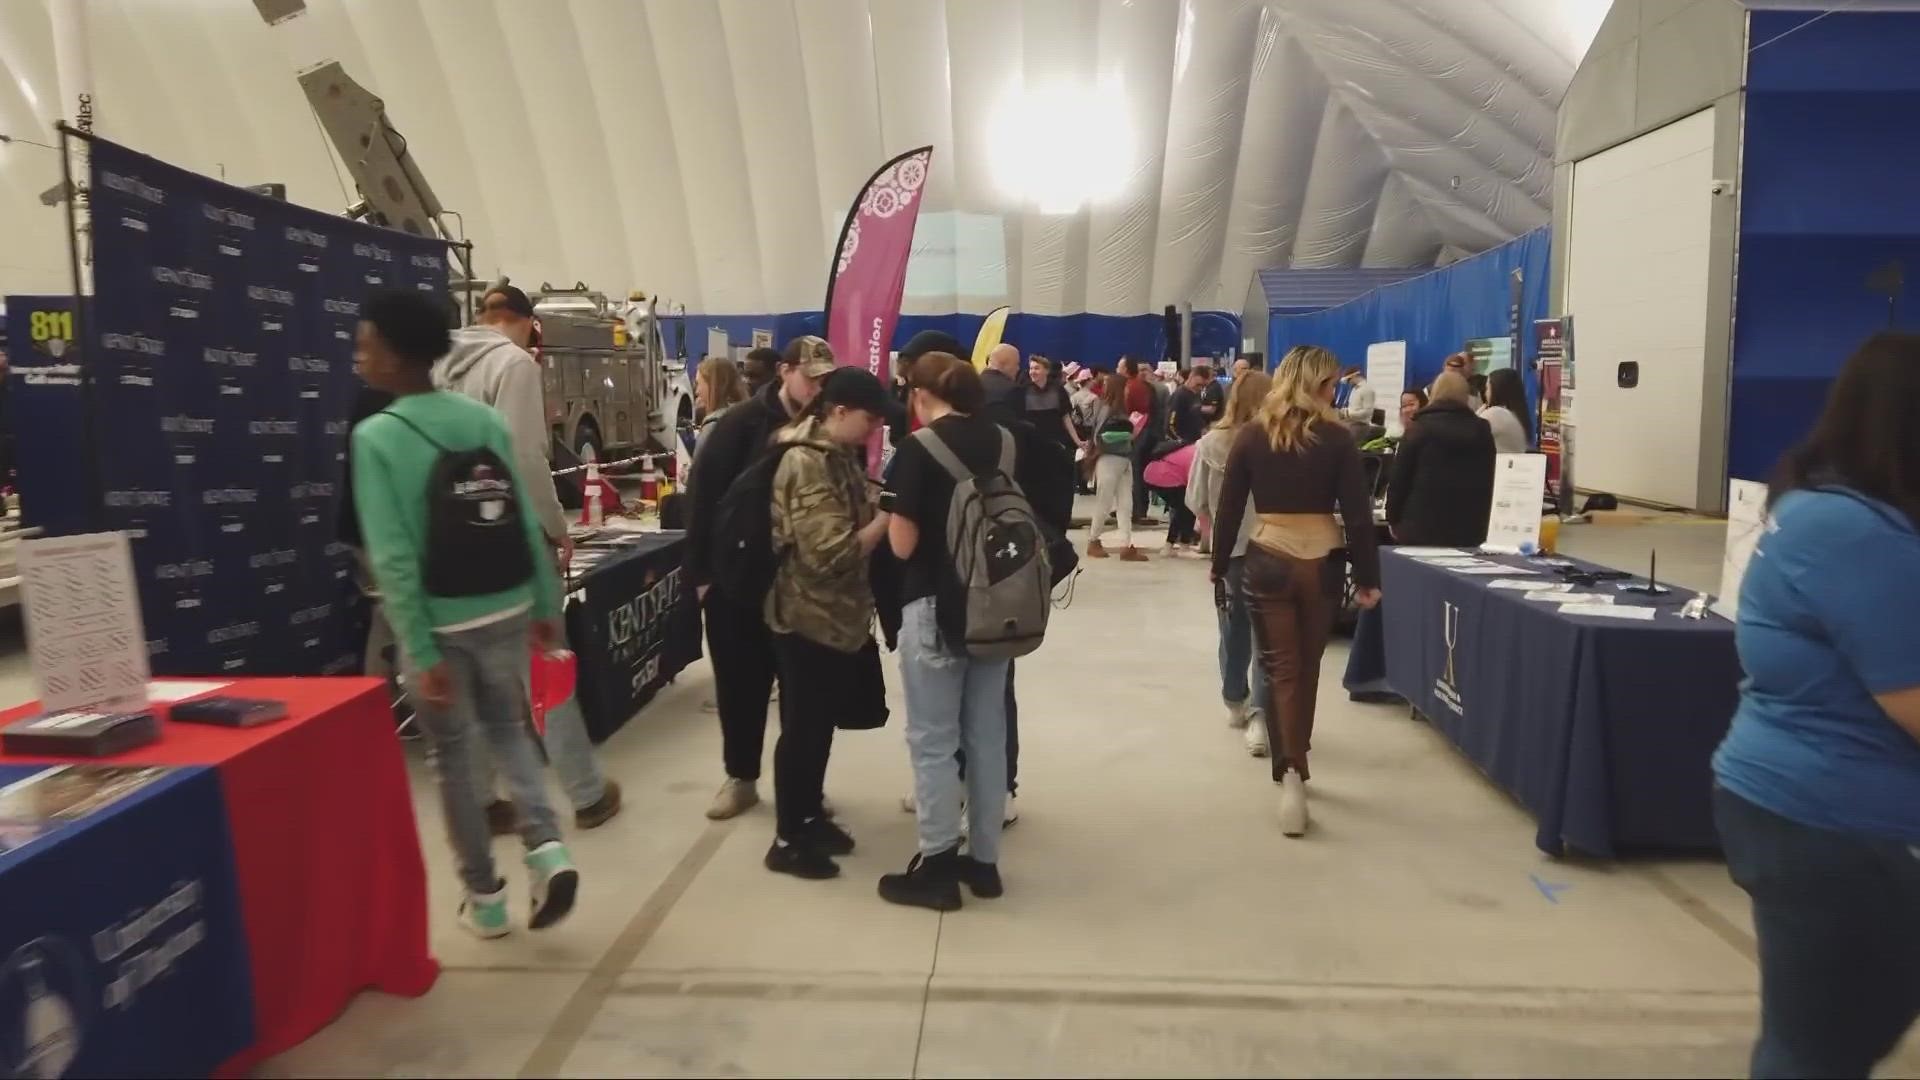 Over a thousand students from across the area are getting a chance to explore future careers.